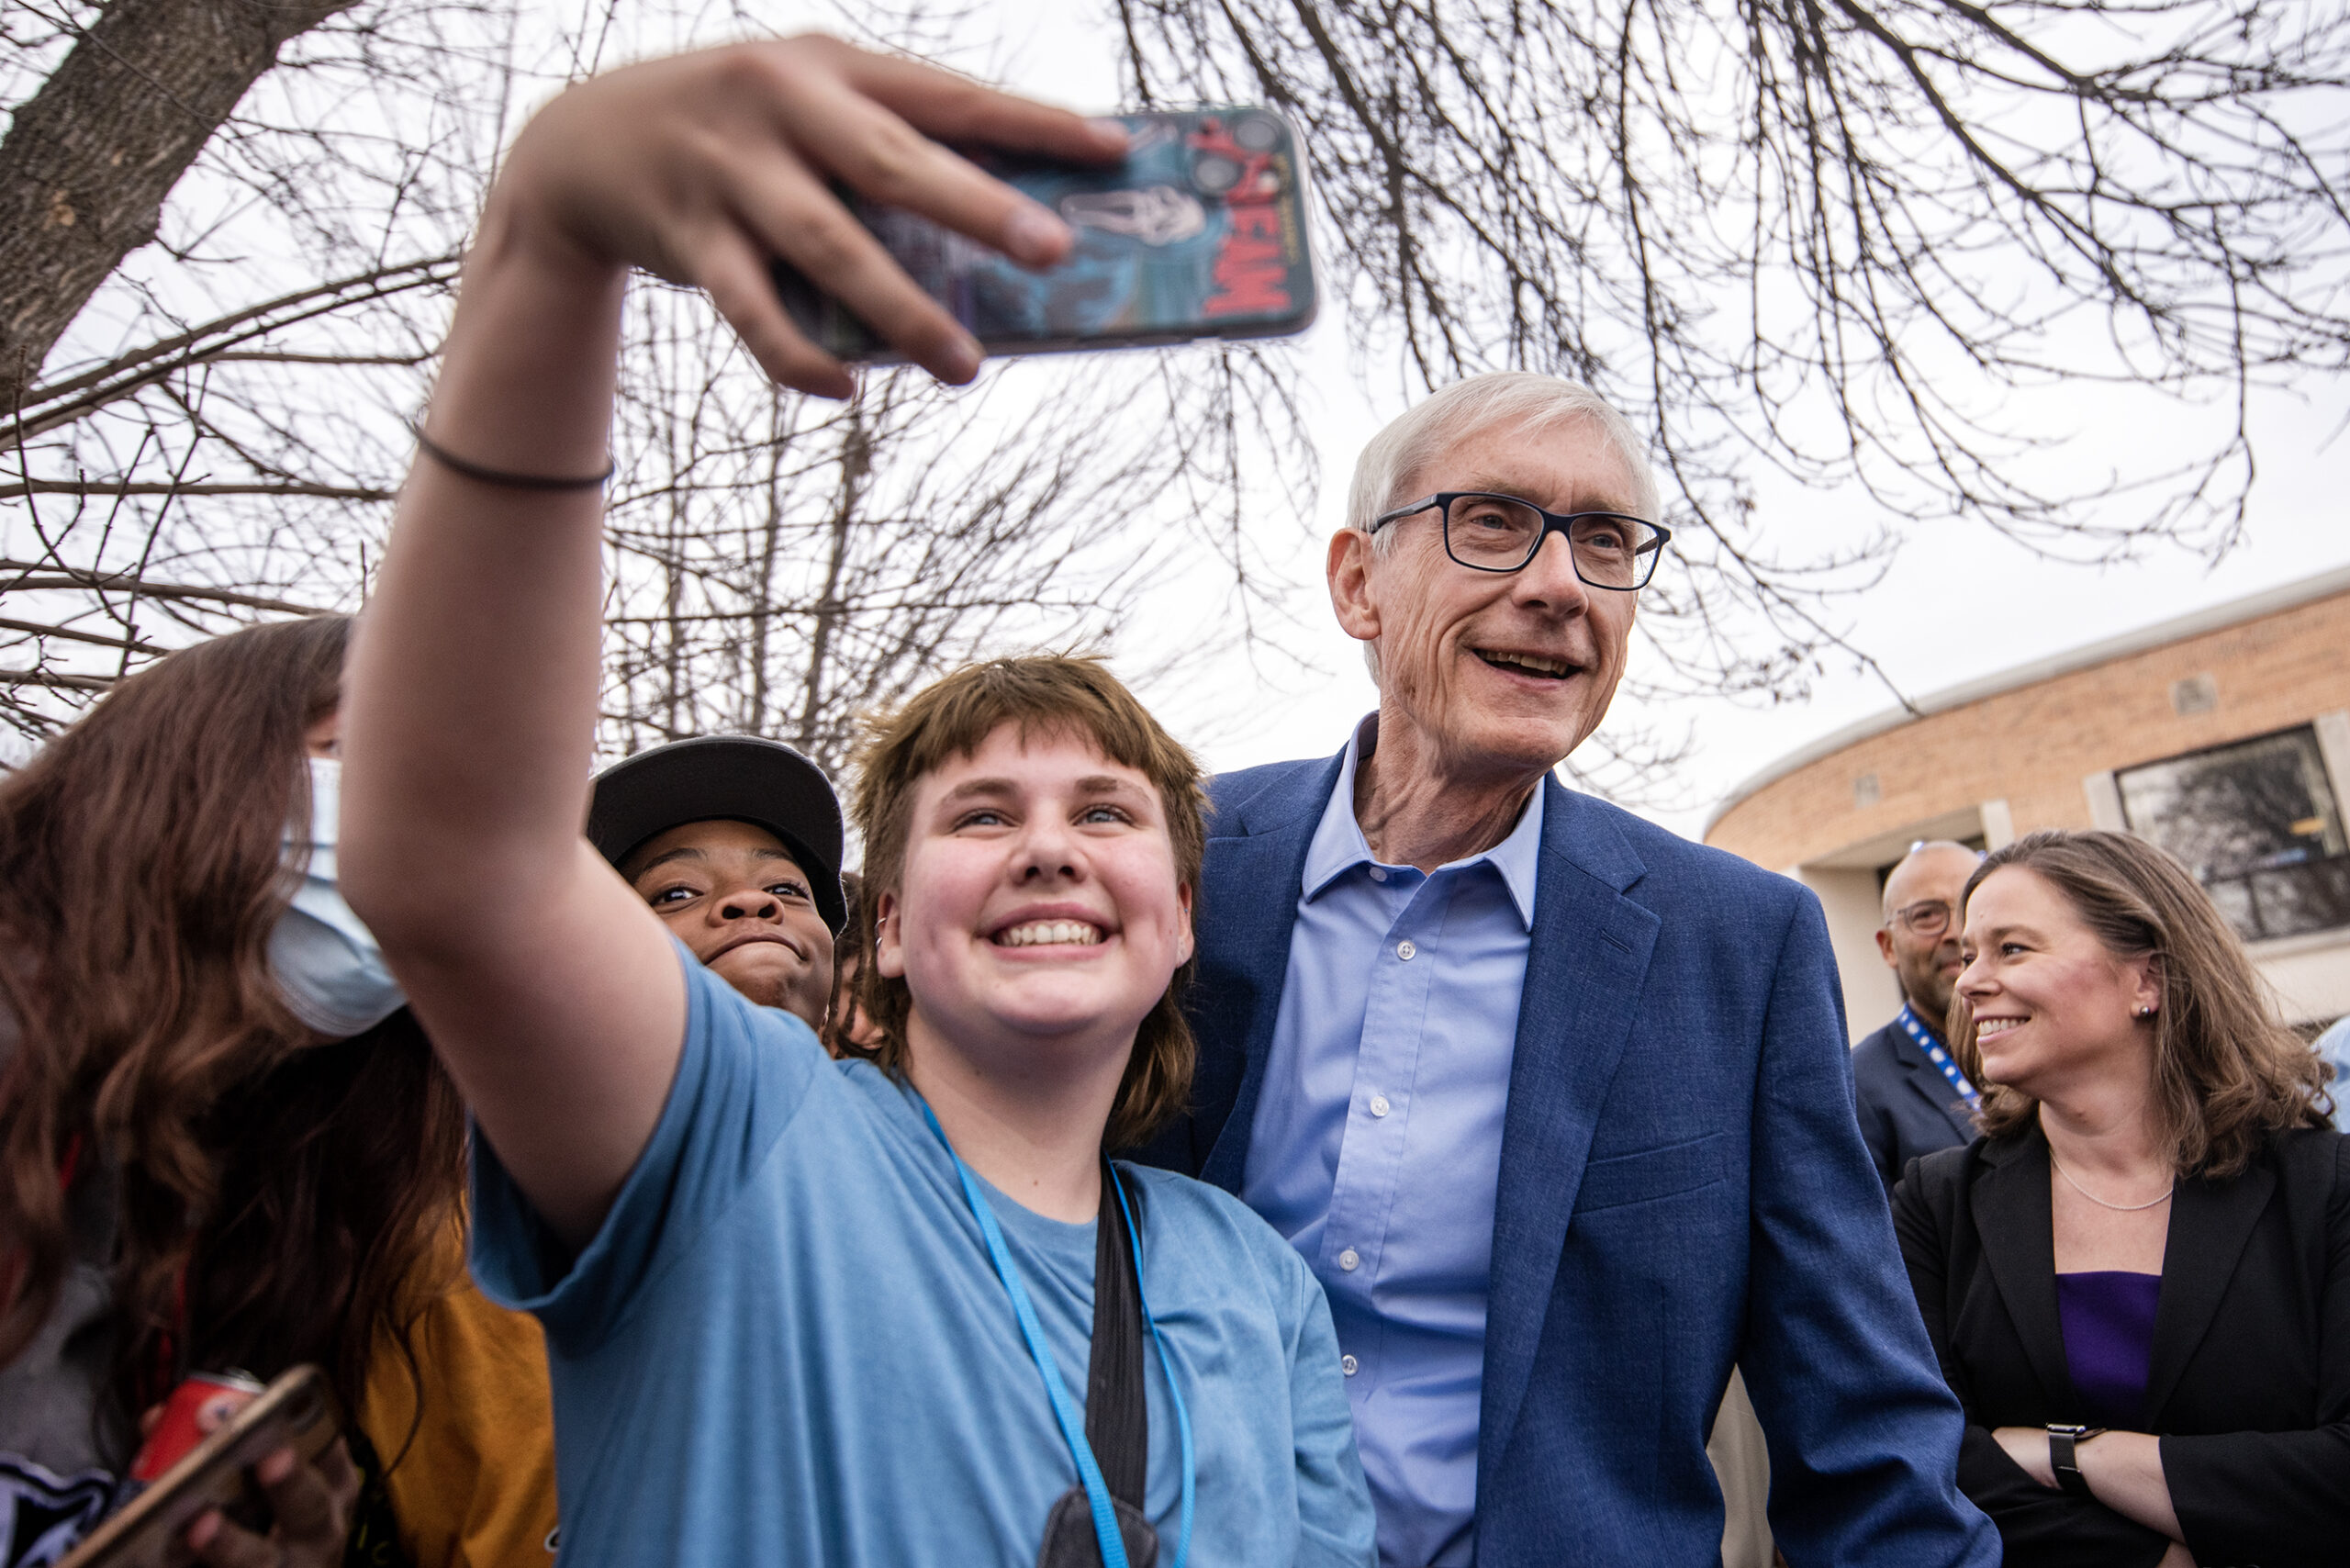 Evers’ win shows promising trends for Democrats